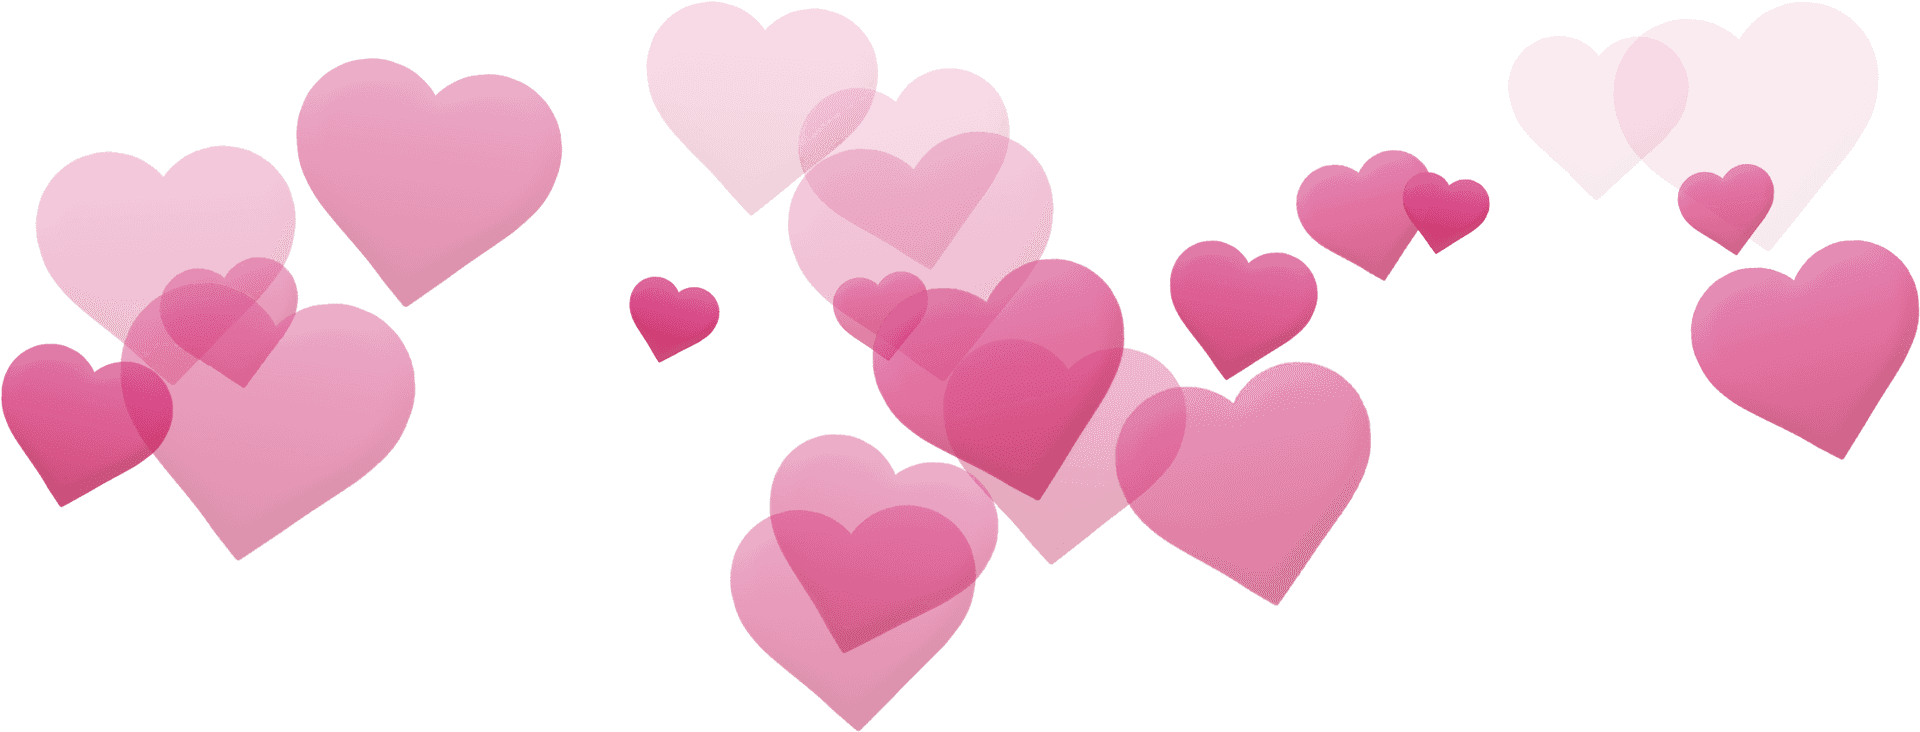 Floating Pink Hearts Filter PNG